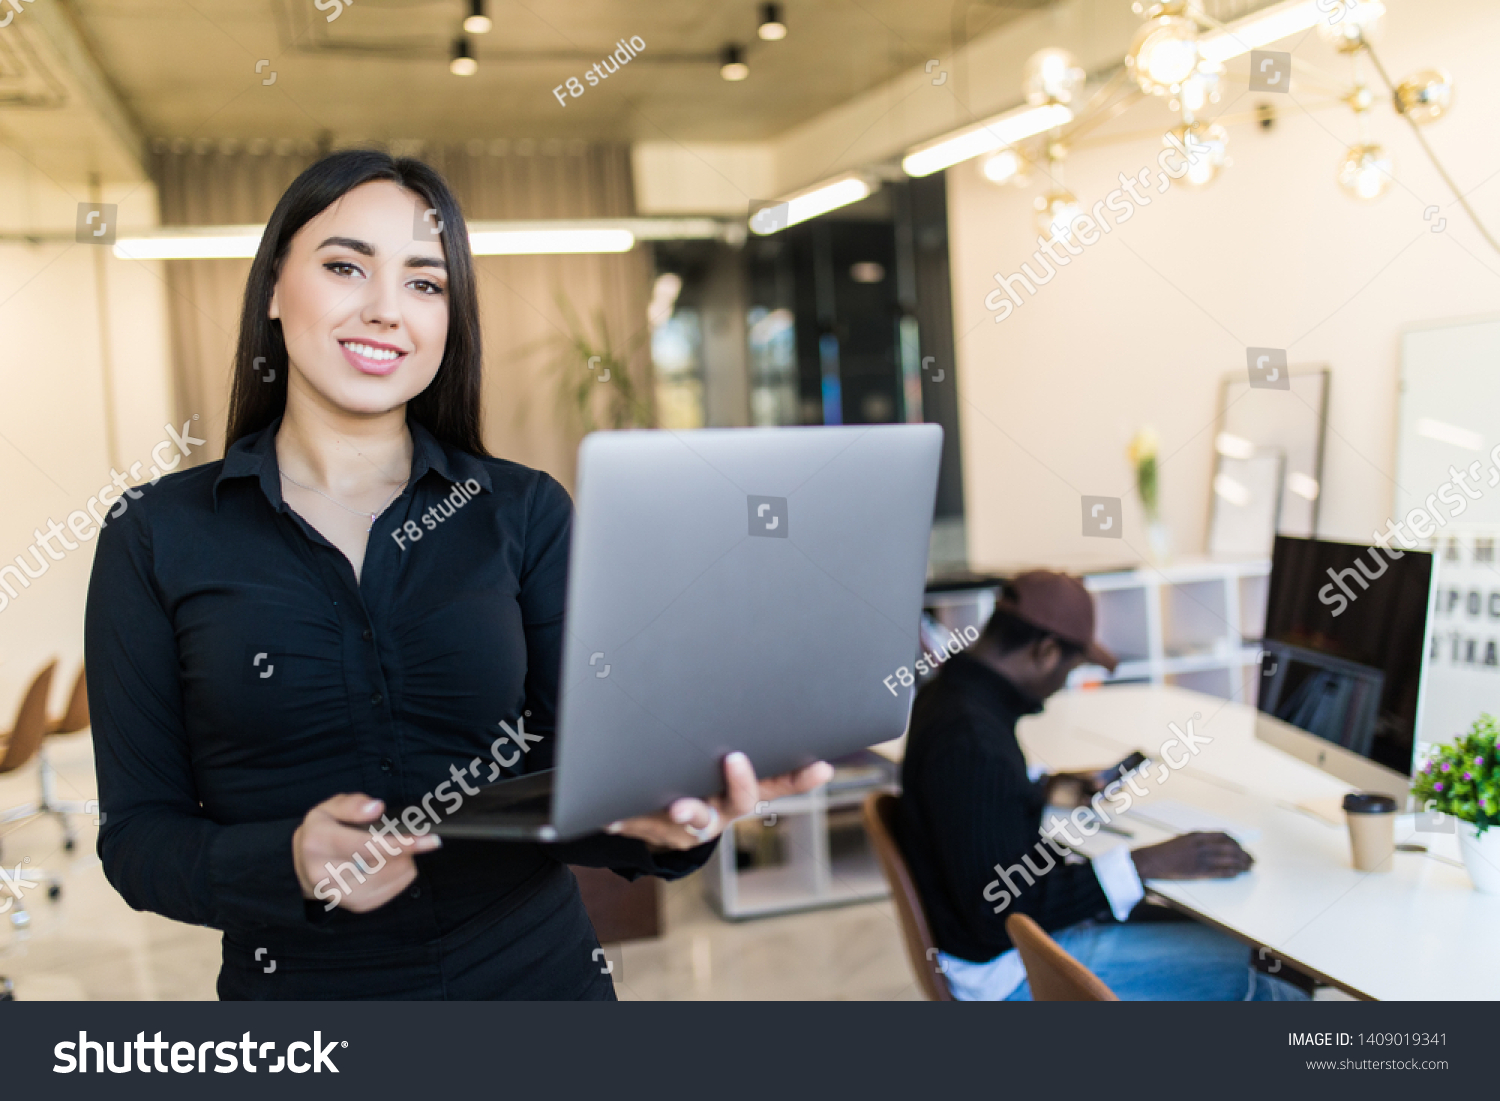 Elegant and cheerful businesswoman. Cheerful young beautiful woman in glasses looking at camera with smile while sitting at her working place #1409019341